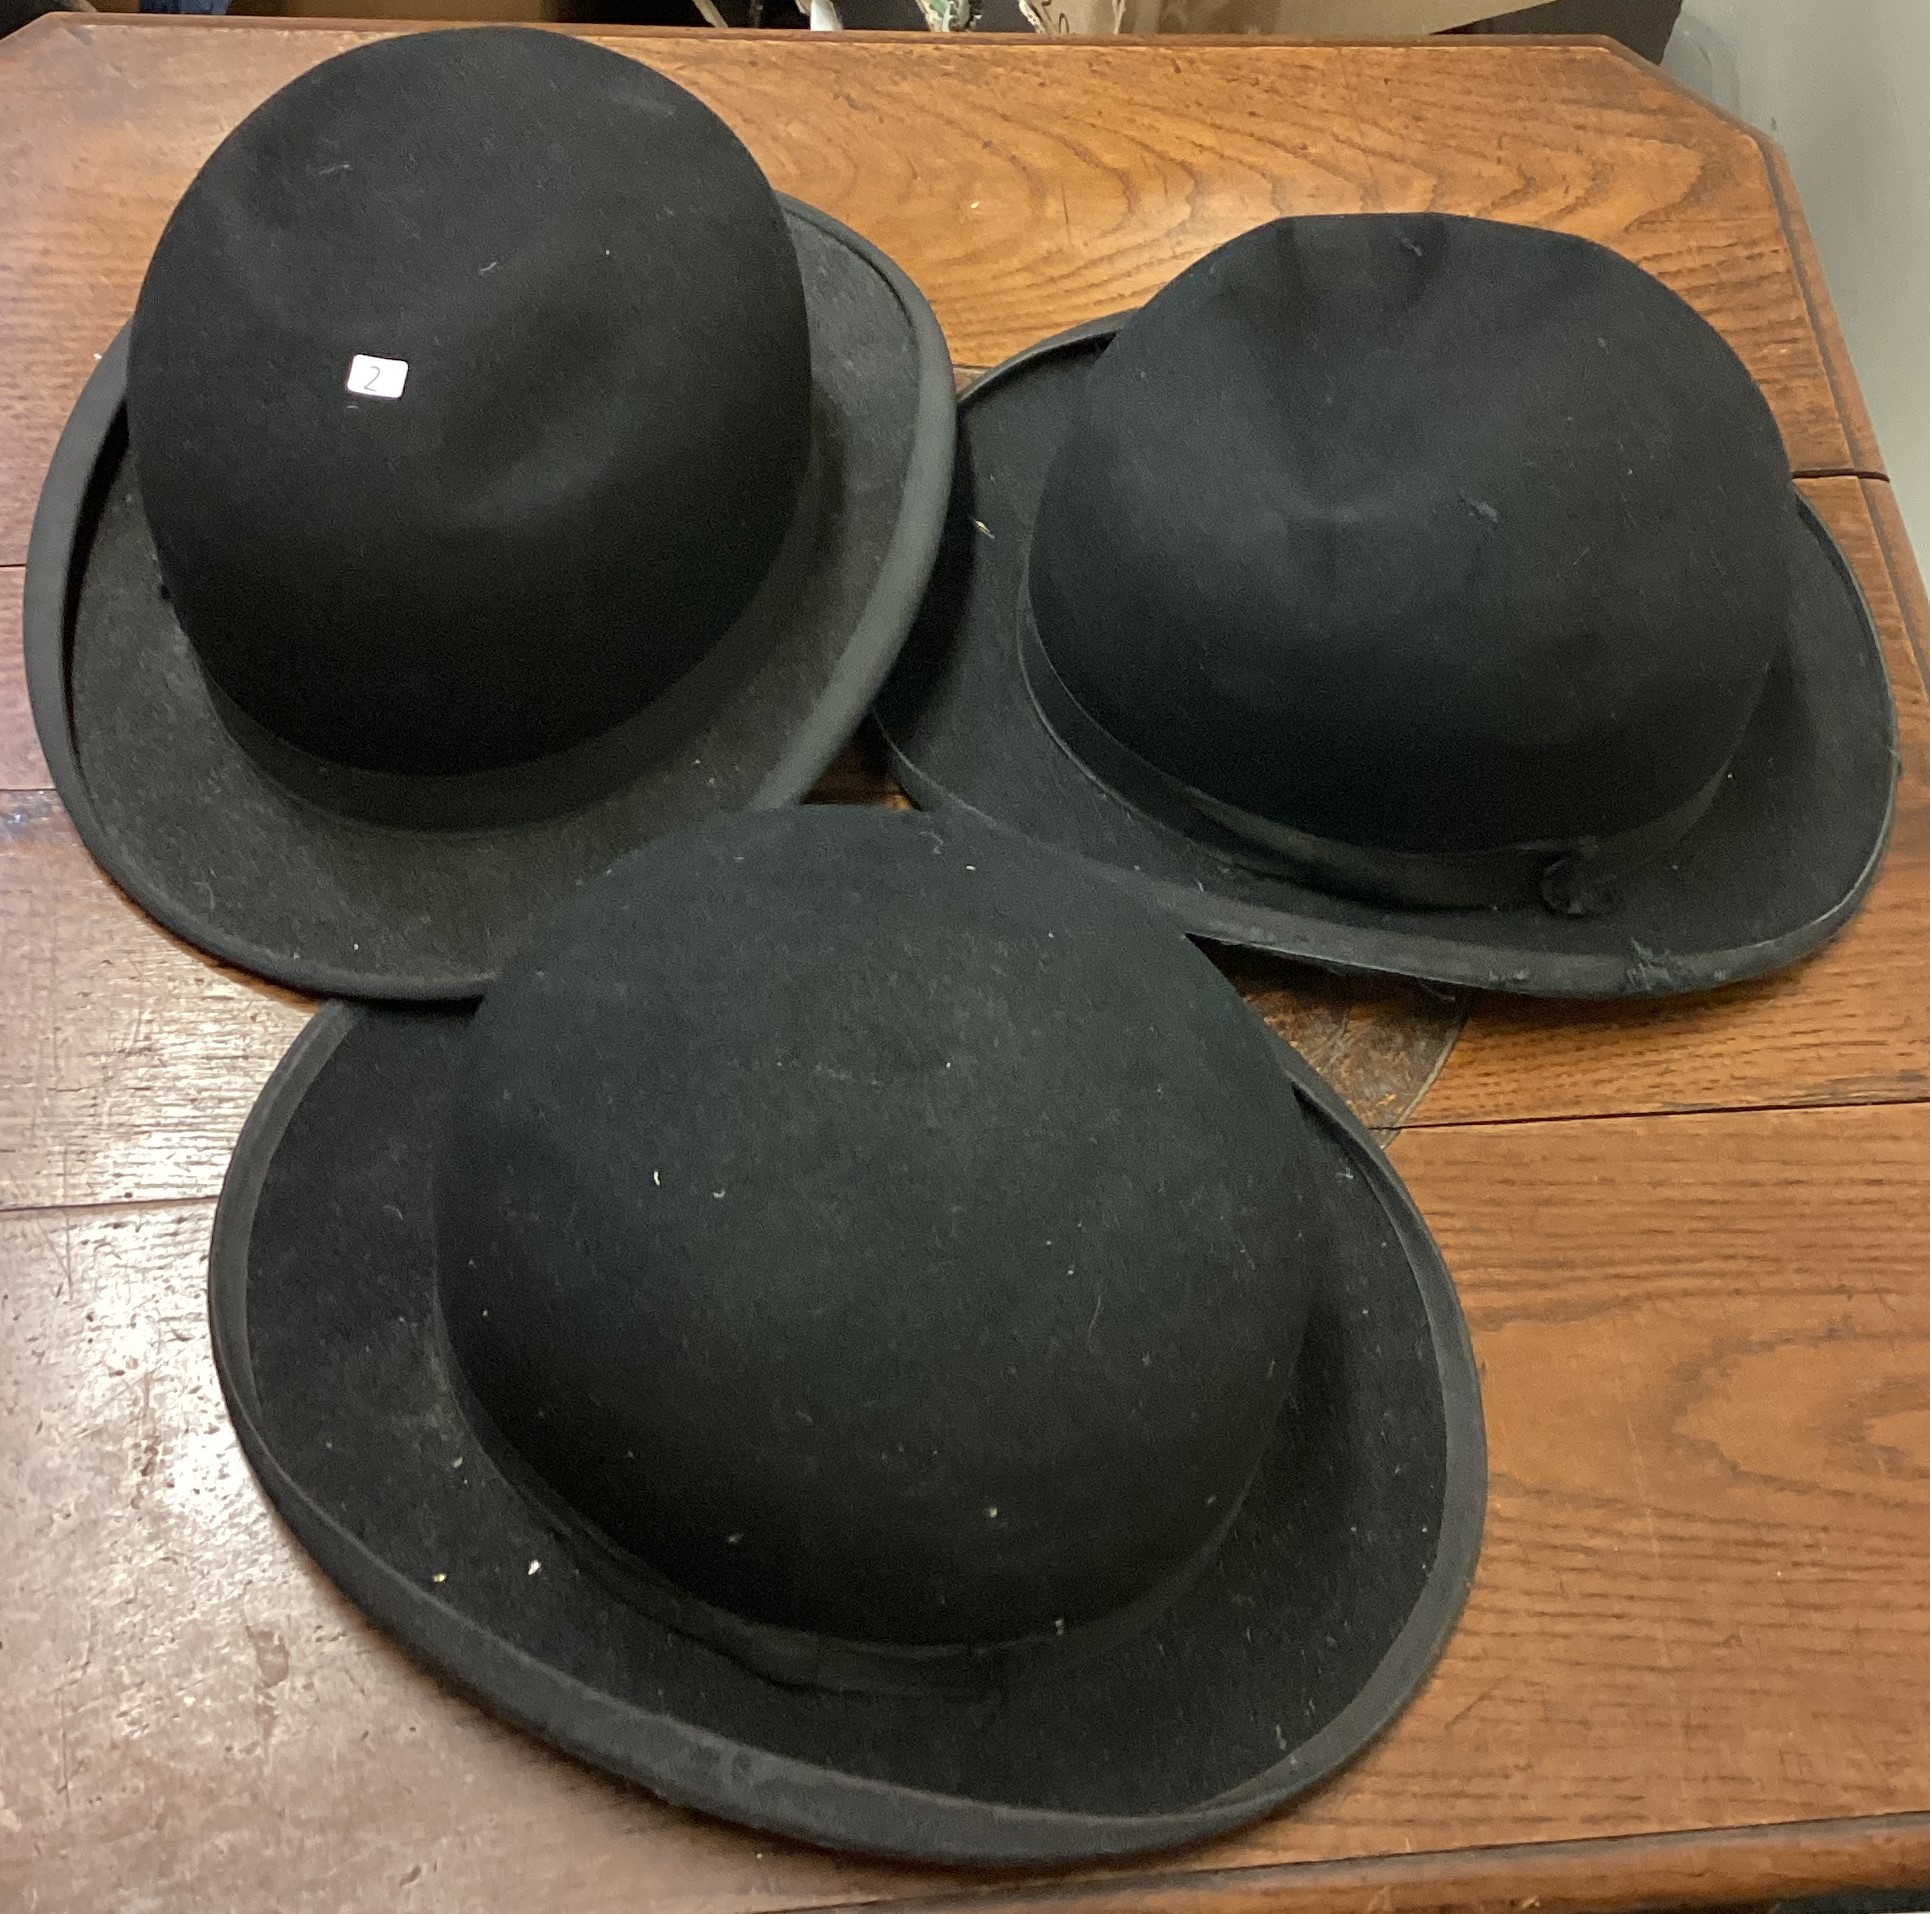 A collection of bowler hats.